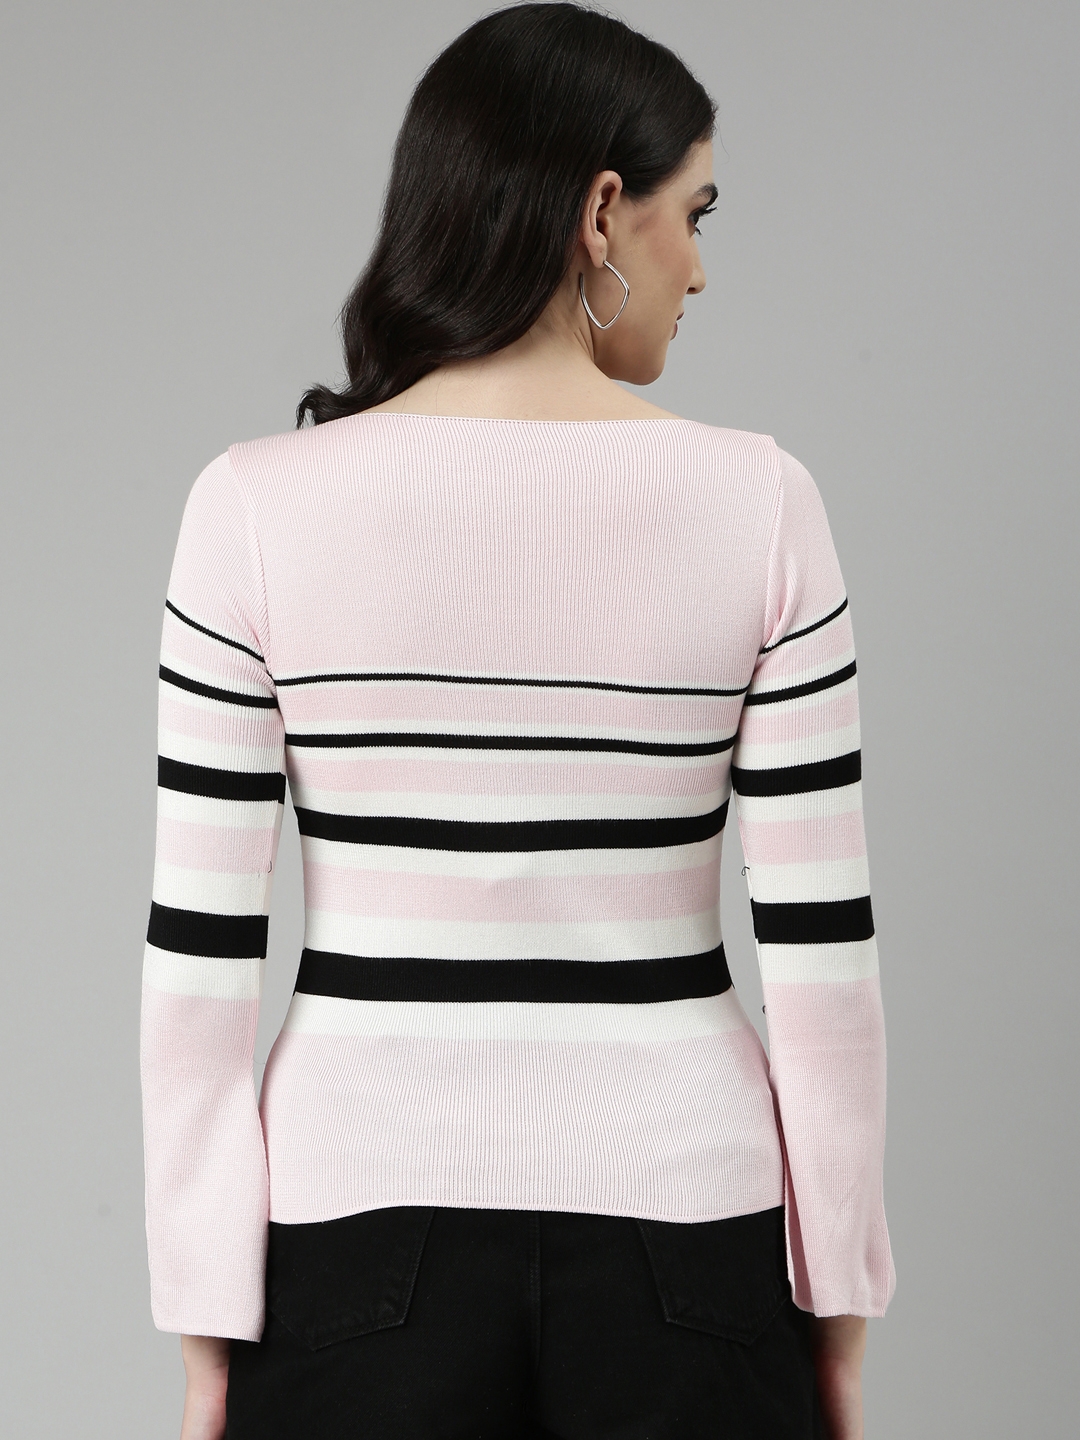 Showoff | SHOWOFF Women's Boat Neck Striped Bell Sleeves Fitted Pink Top 4